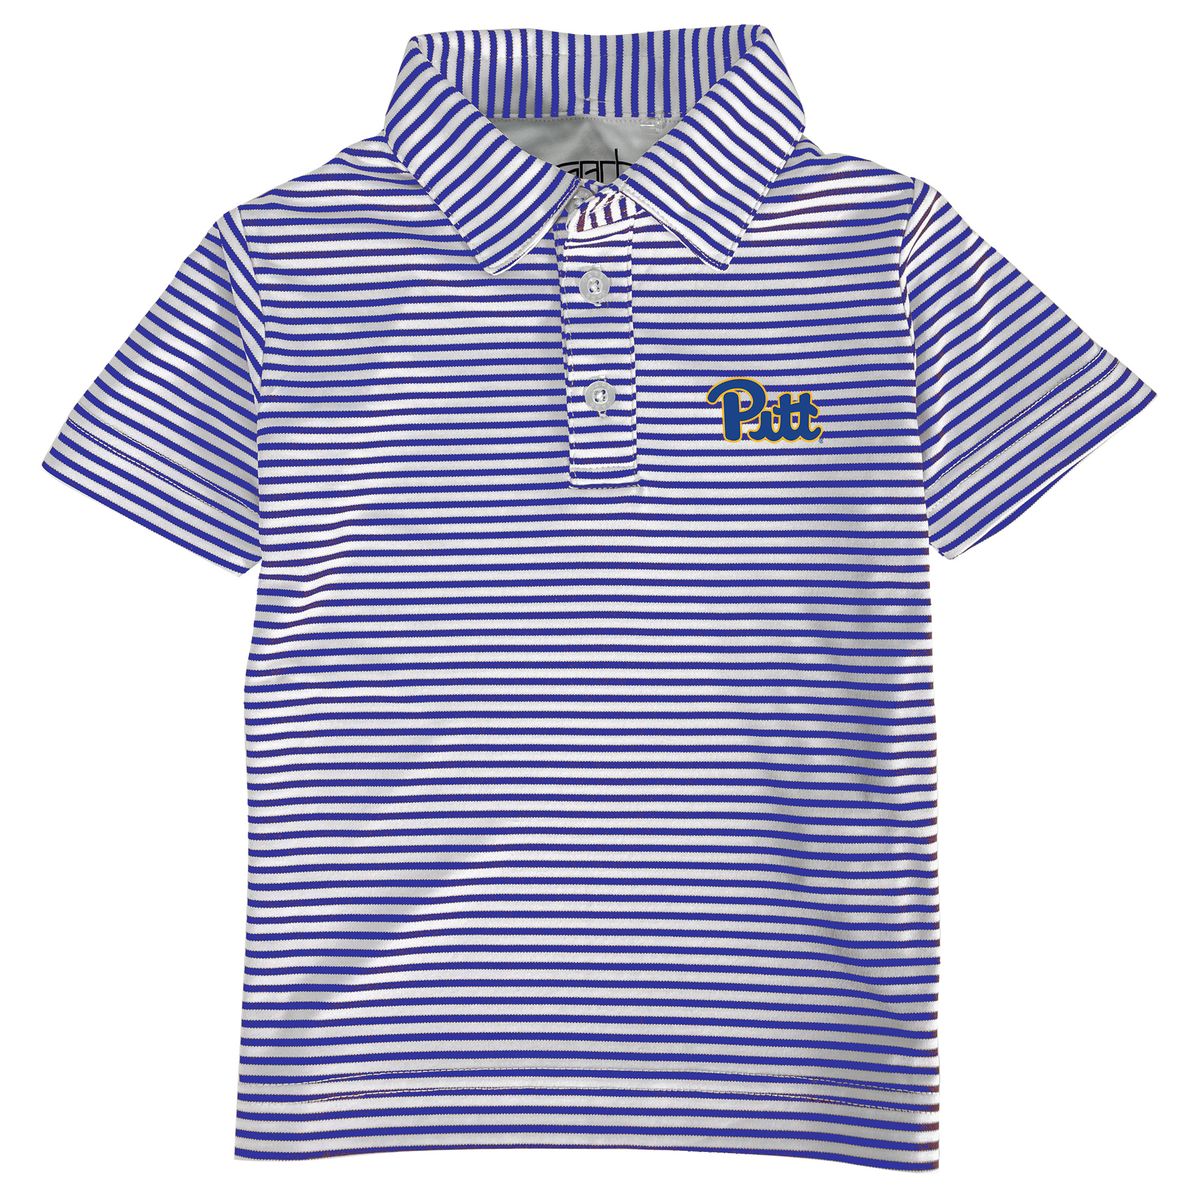 Pittsburgh Panthers Toddler Boys' Polo